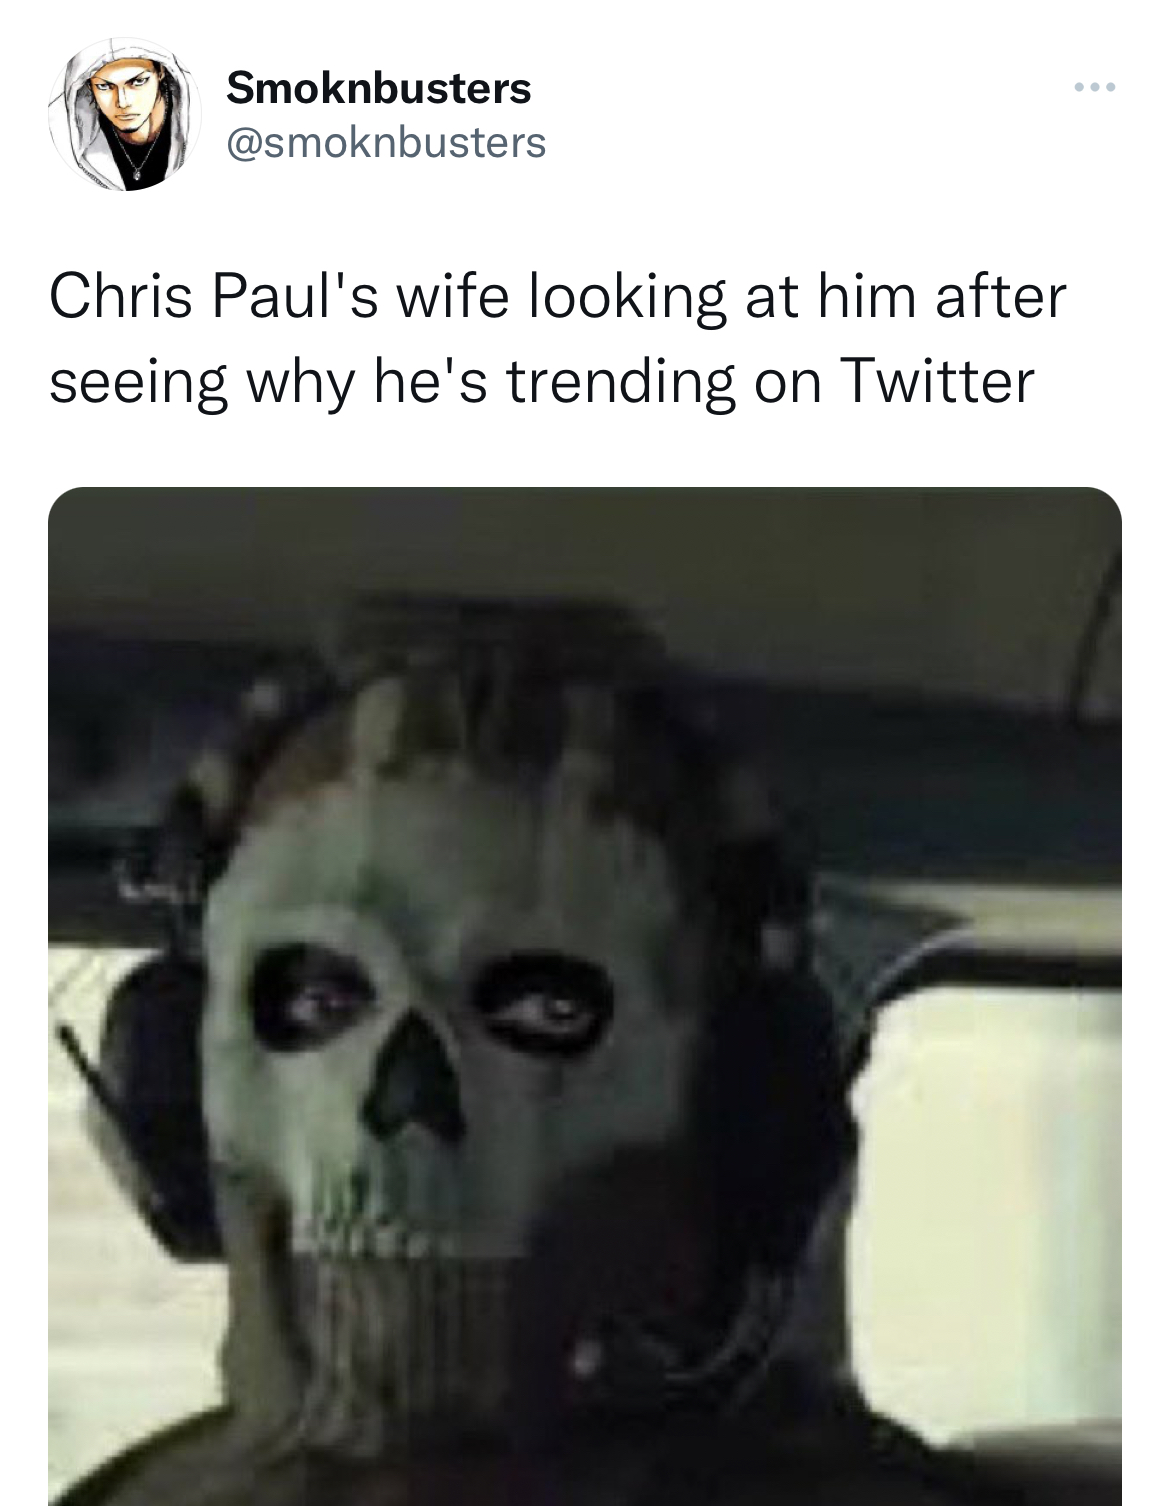 Chris Paul and Kim K memes - mw2 ghost staring meme - Smoknbusters w Chris Paul's wife looking at him after seeing why he's trending on Twitter